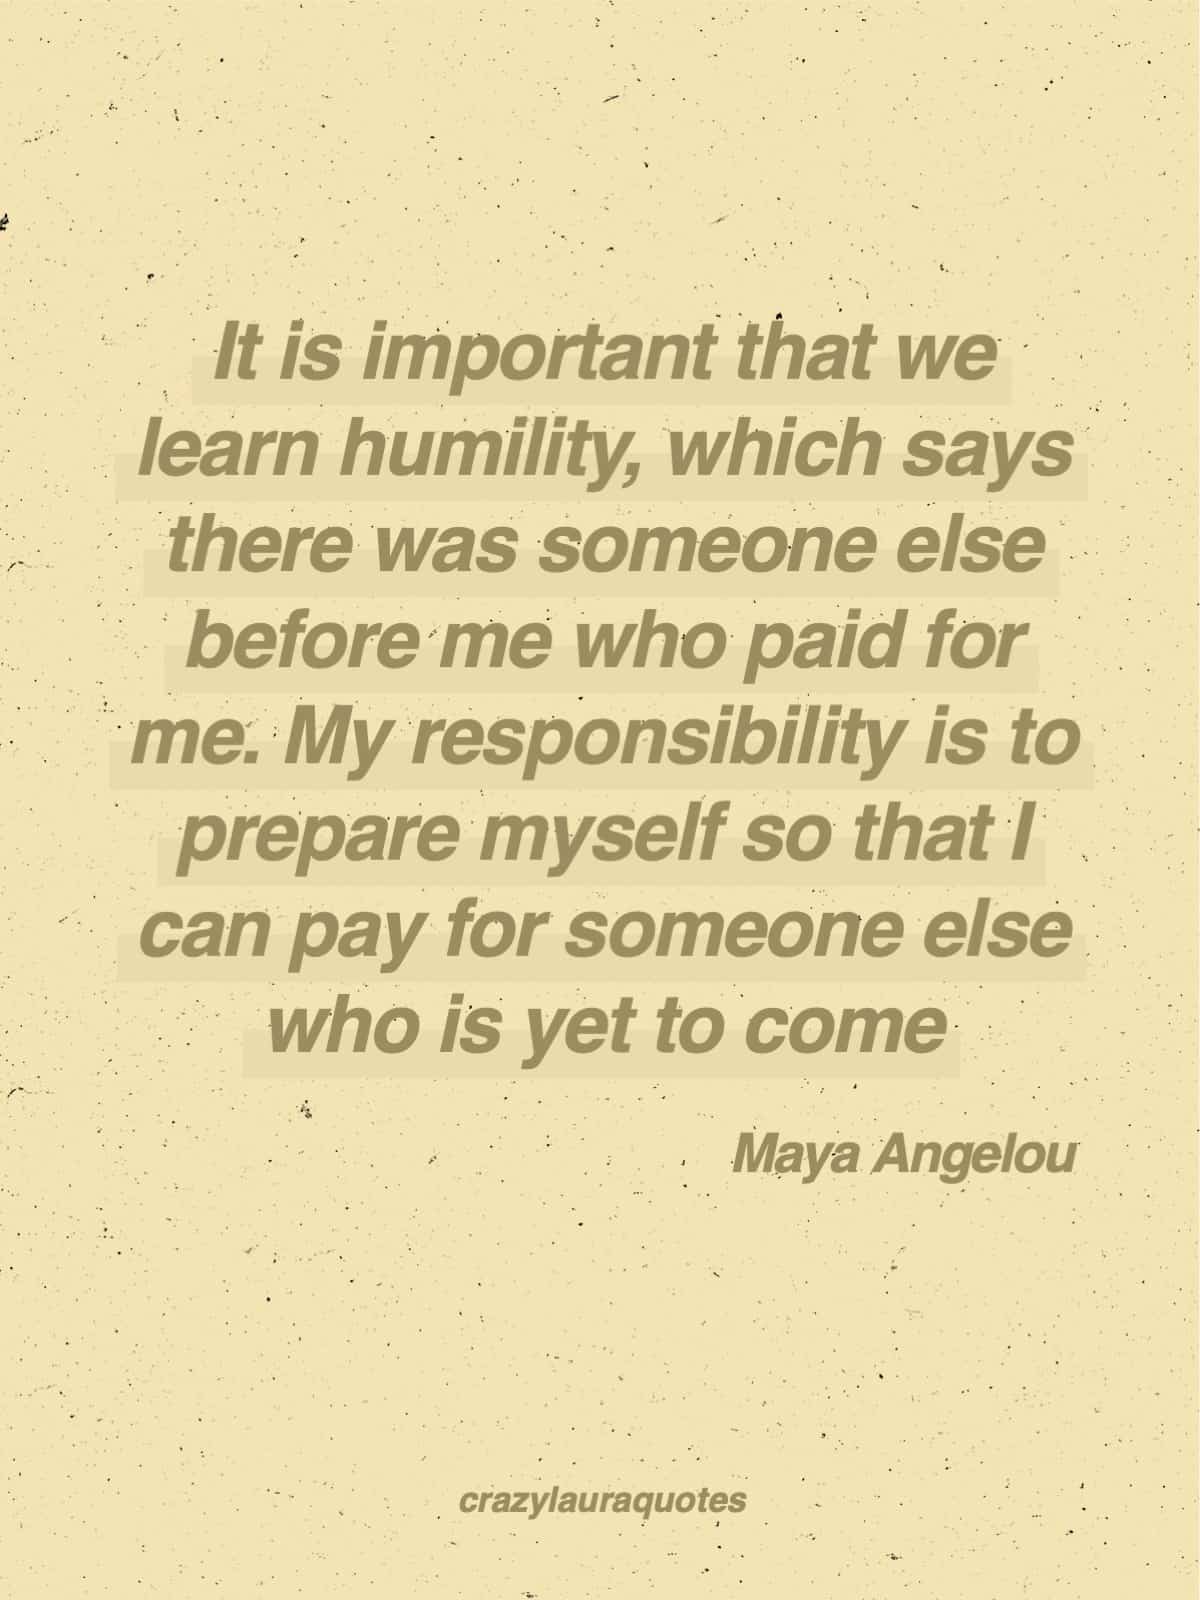 learn humility statement from maya angelou